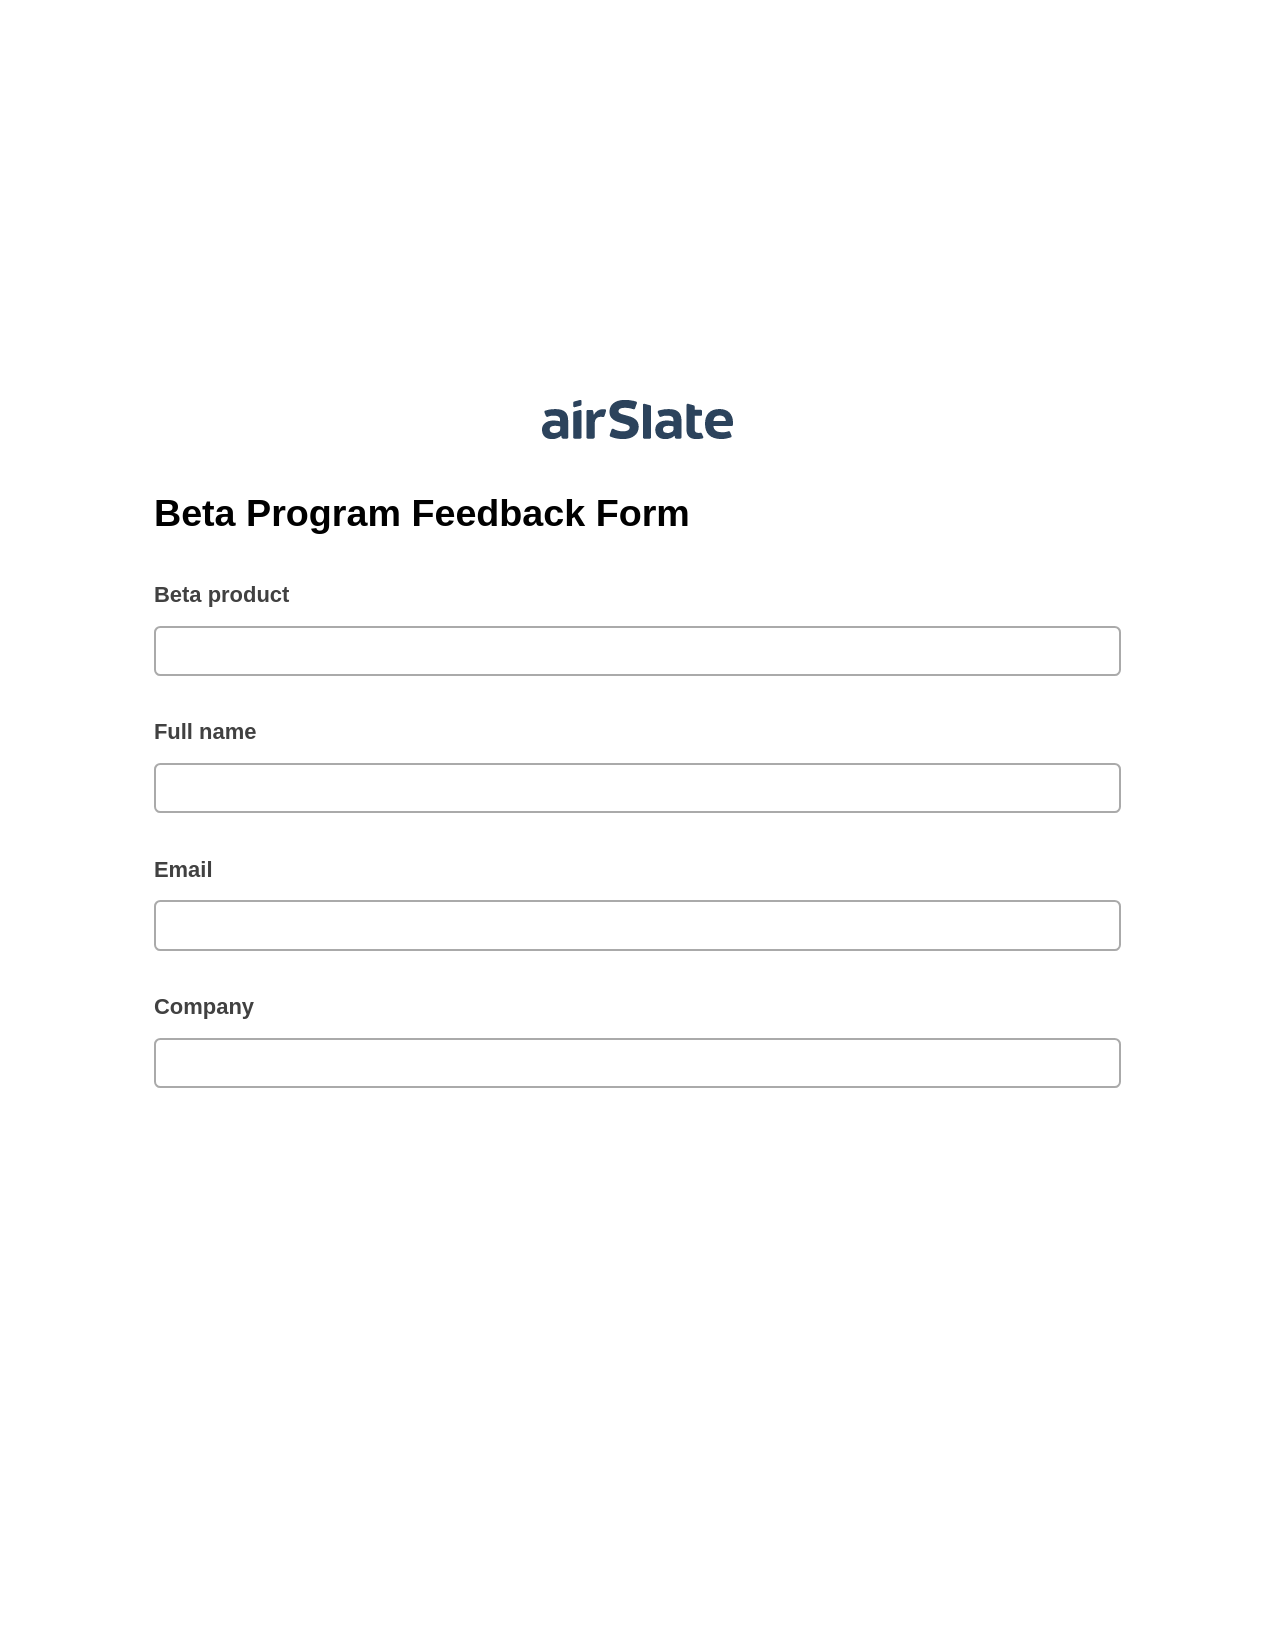 Beta Program Feedback Form Pre-fill Dropdown from Airtable, Add Tags to Slate Bot, Export to Smartsheet